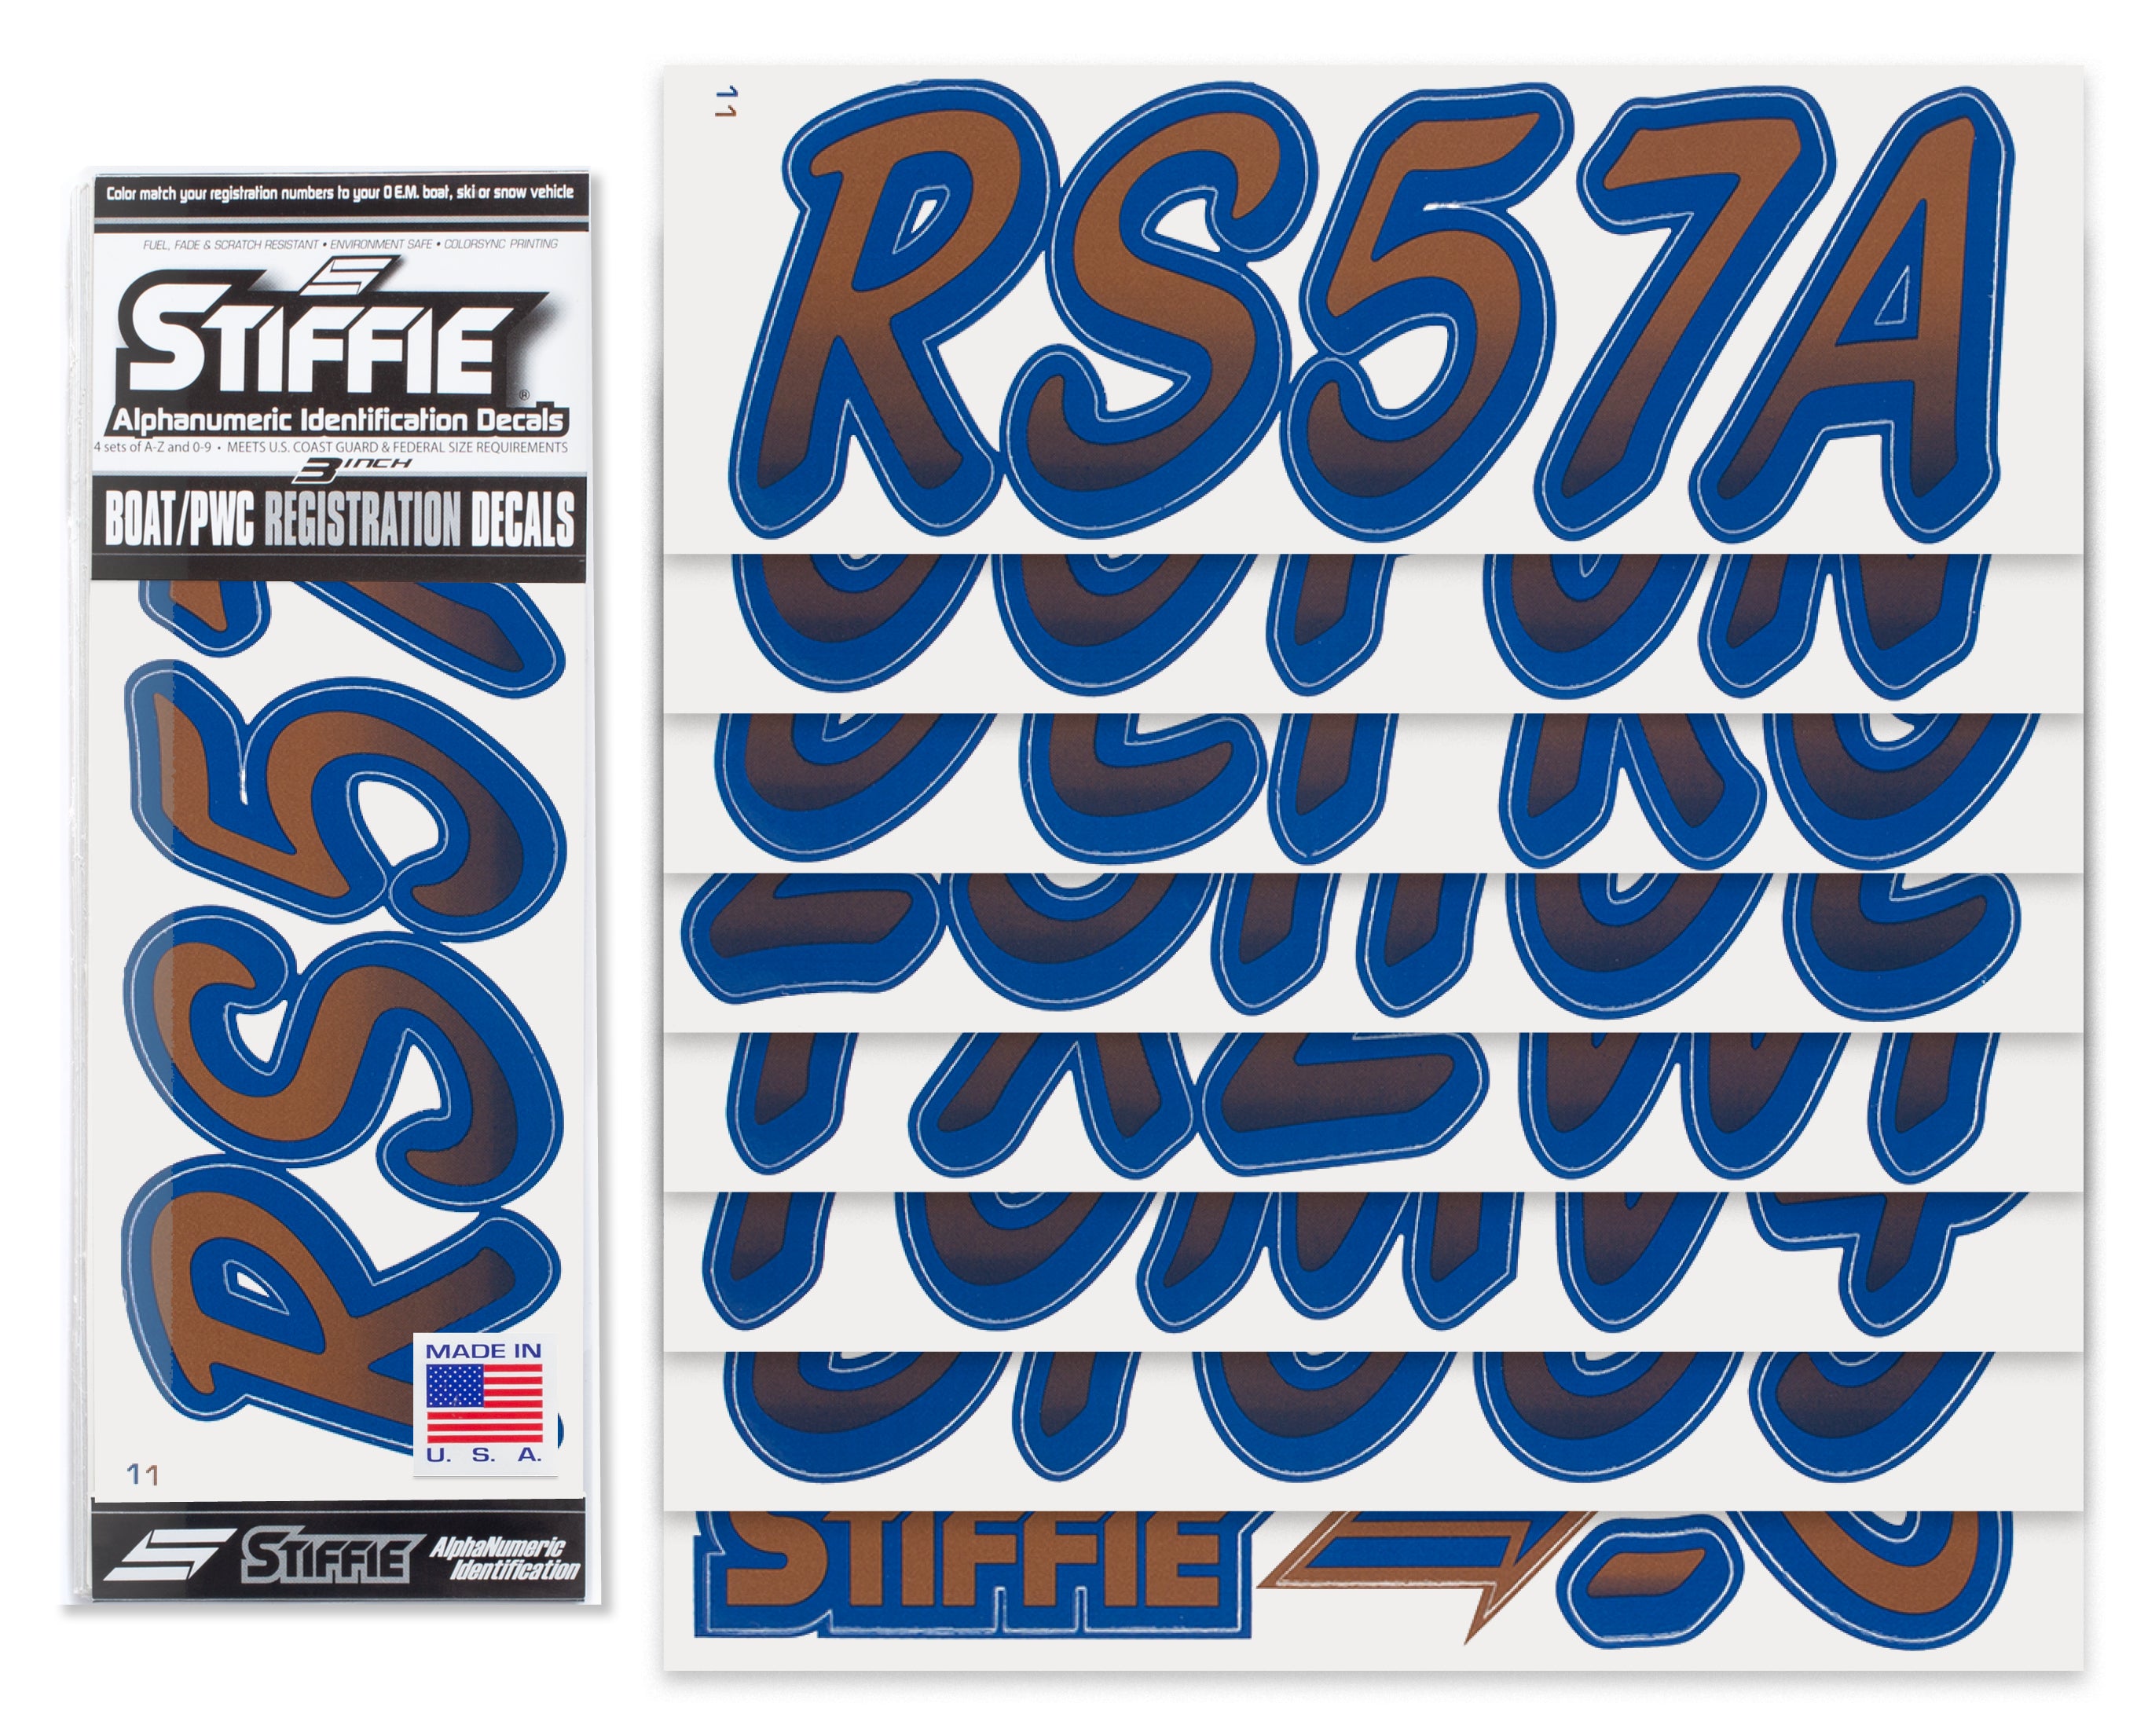 Stiffie Whipline Metallic Copper/Navy 3" Alpha-Numeric Registration Identification Numbers Stickers Decals for Boats & Personal Watercraft